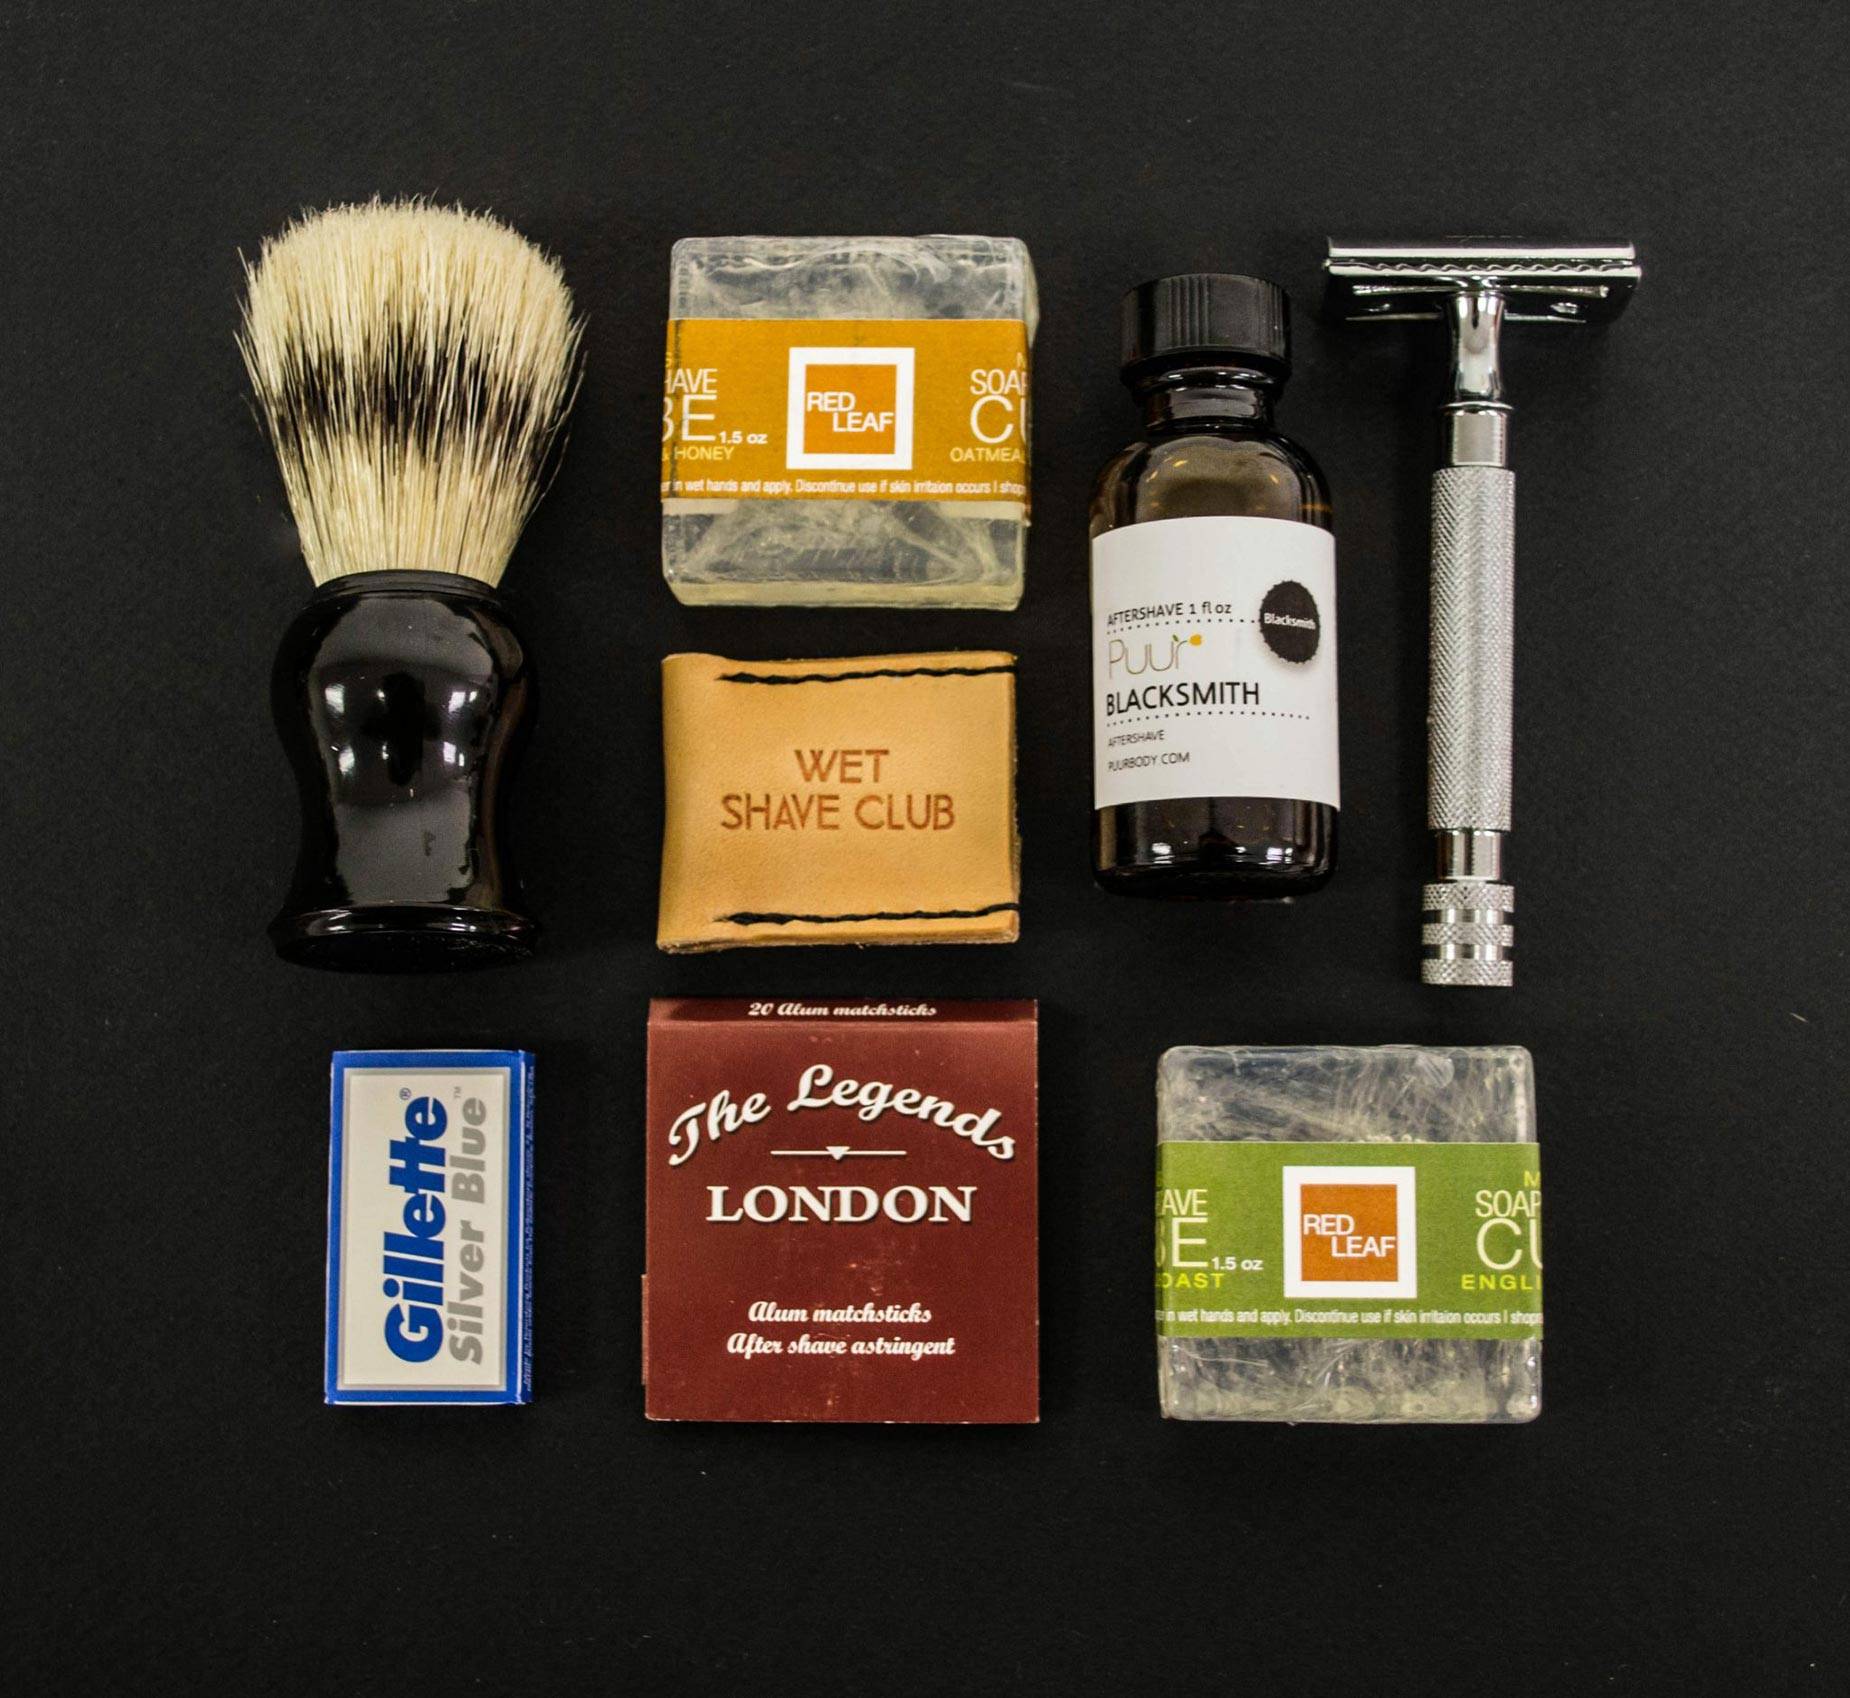 Wet Shave Club's product range